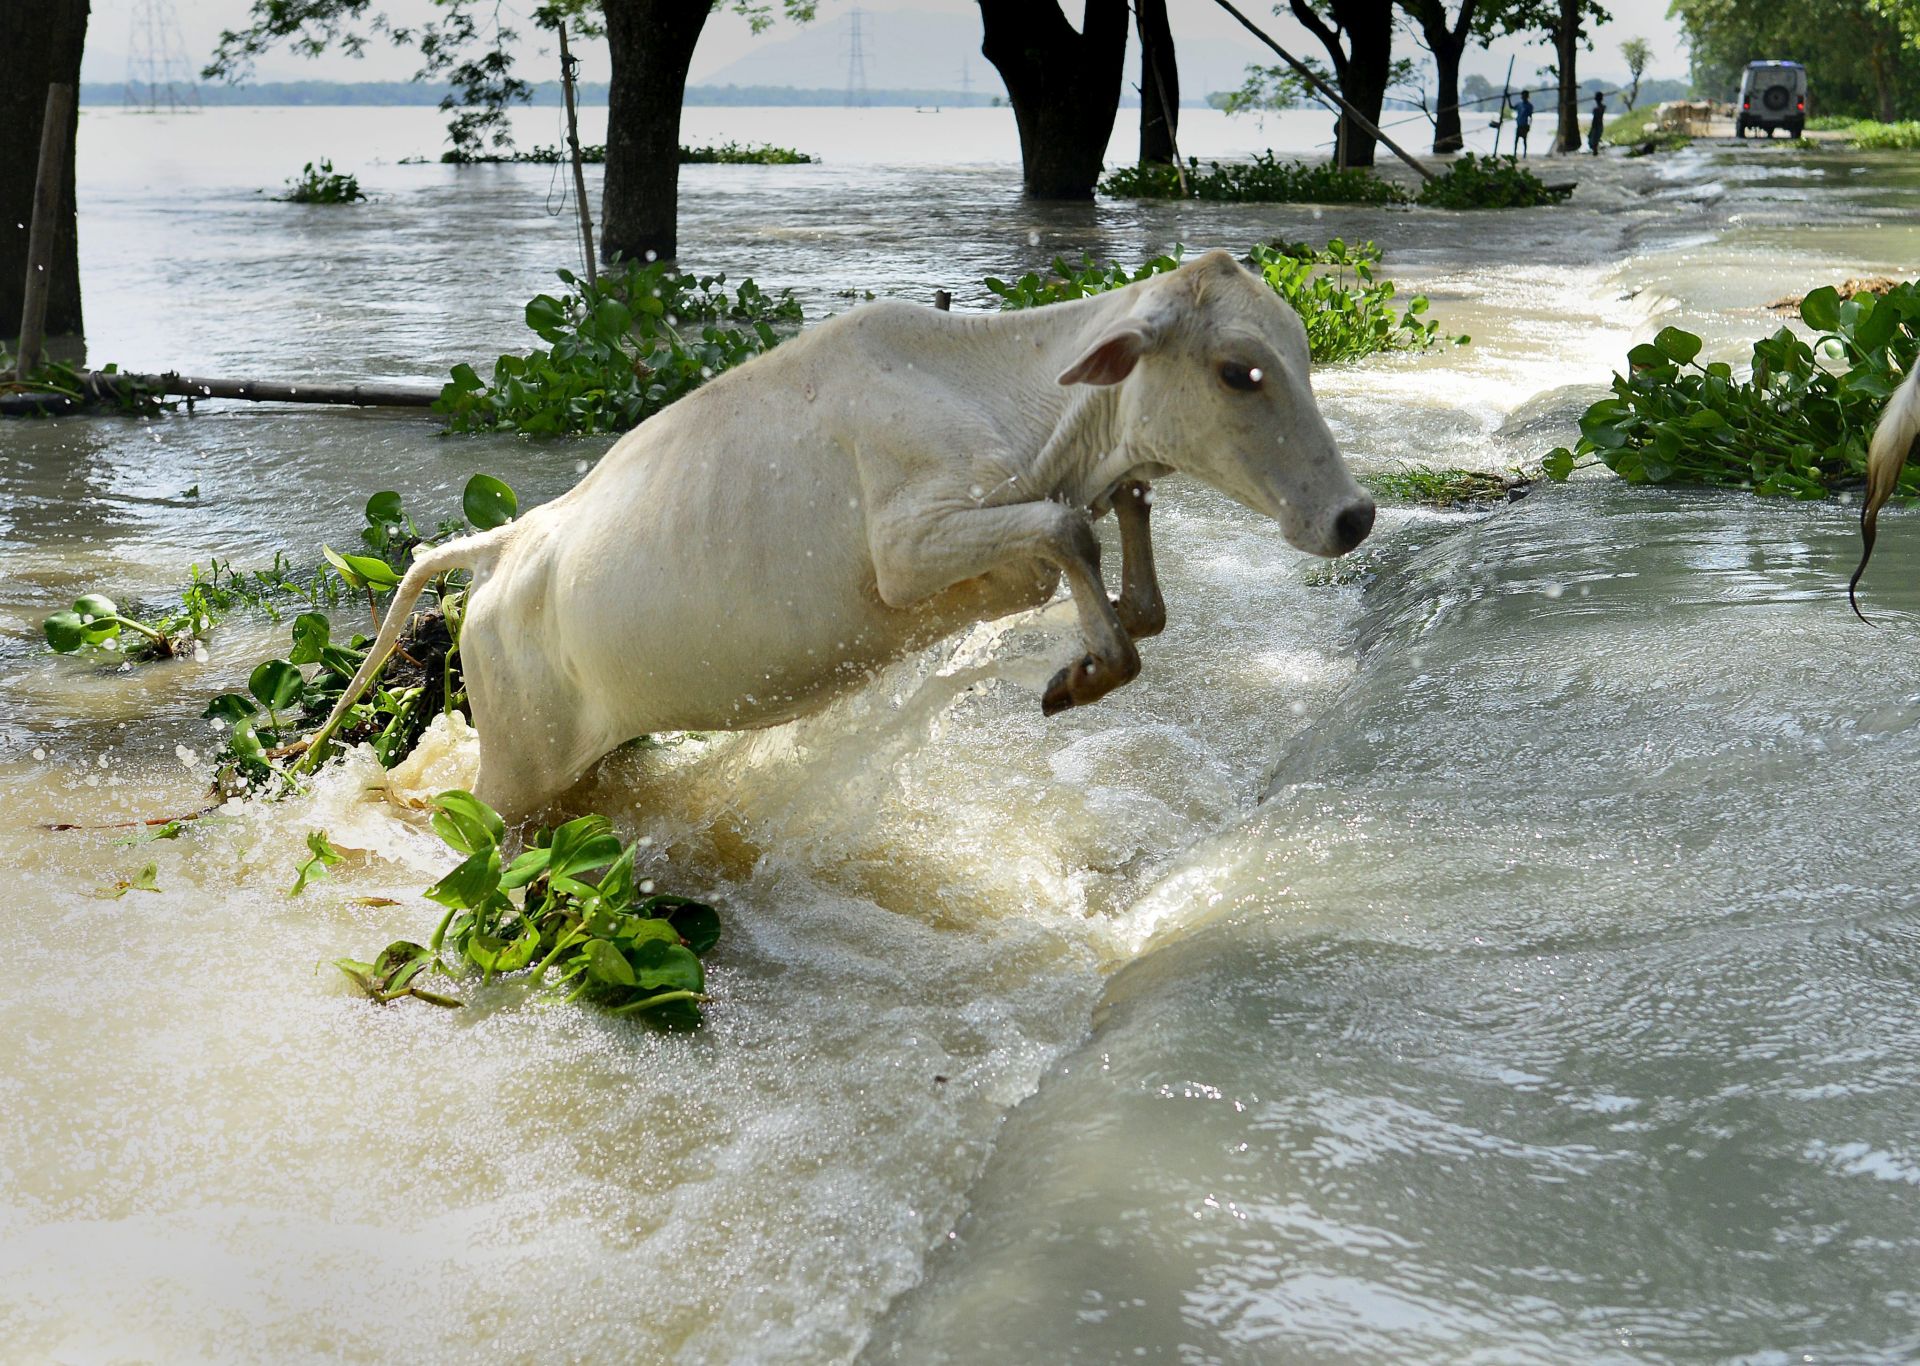 epa05445450 A cow jumps to cross flood water in the flood affected Morigaon district of Assam state, India, 28 July 2016. According to media reports twelve people have died so far and more than 1.6 milion people of 19 districts in Assam state have been affected by the current wave of floods.  EPA/STR